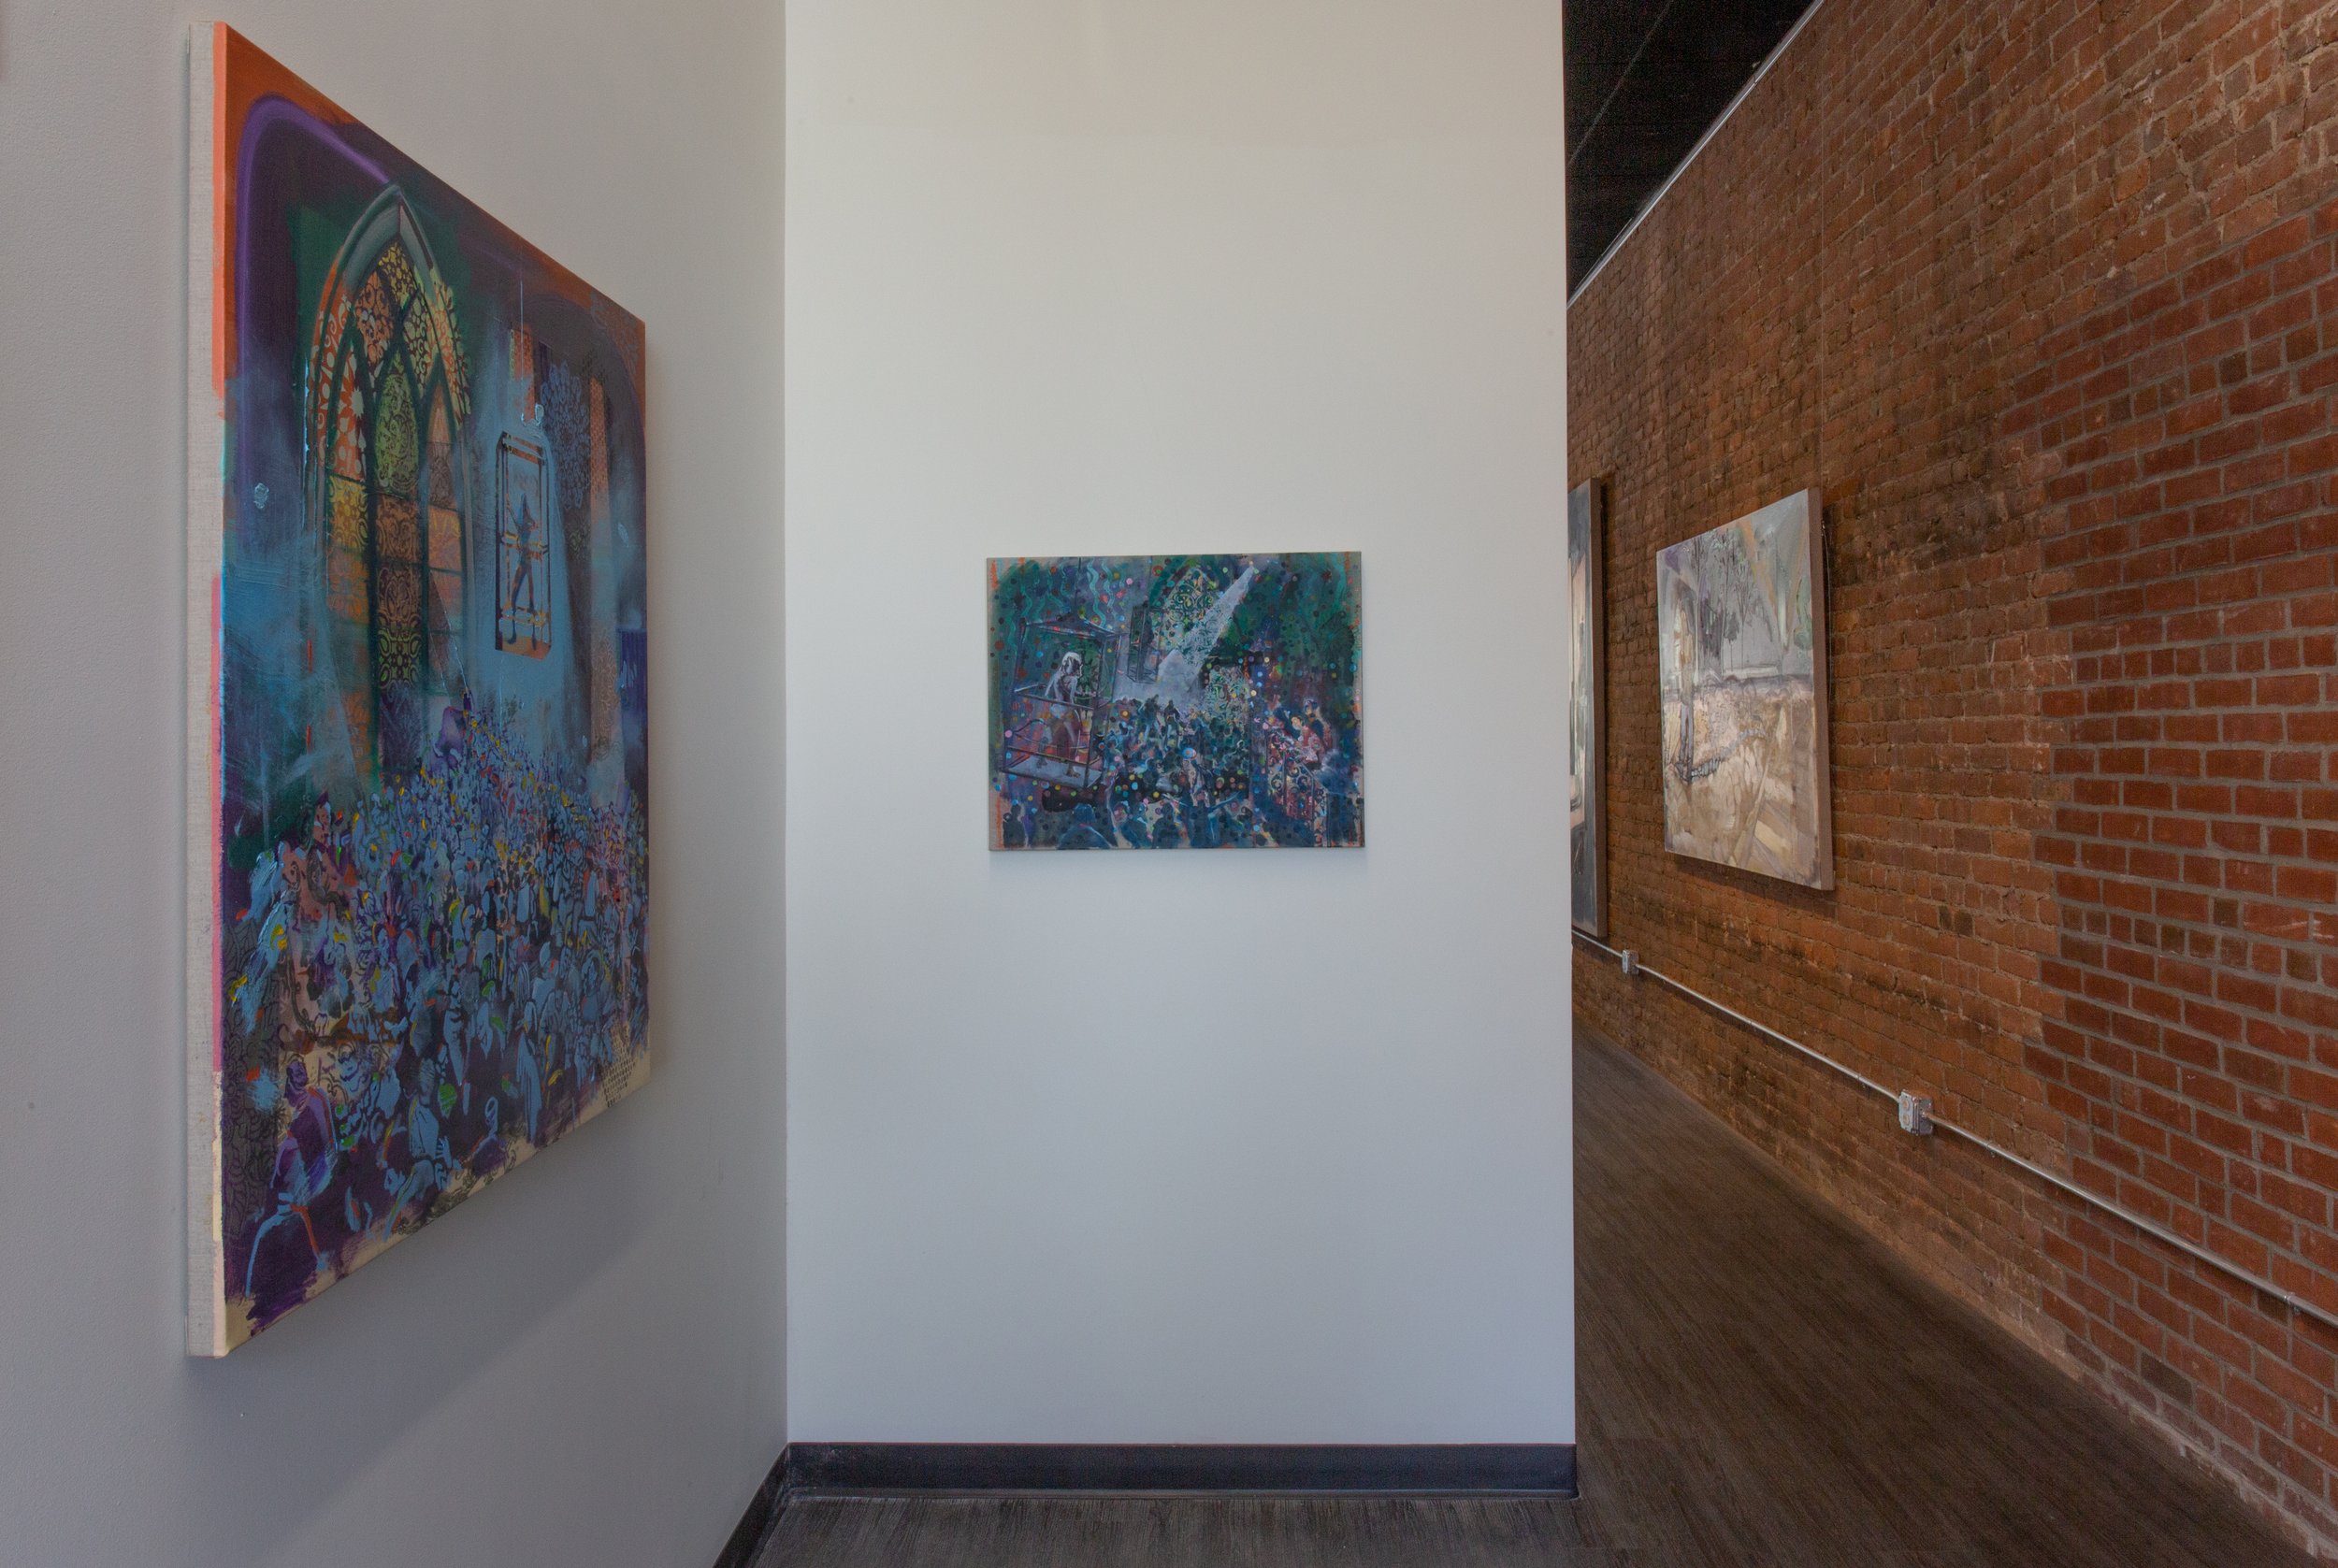  Big Paintings / Limelight Paintings  Installation view  Nearby Gallery, Newton, MA  April 2 - May 4. 2022 